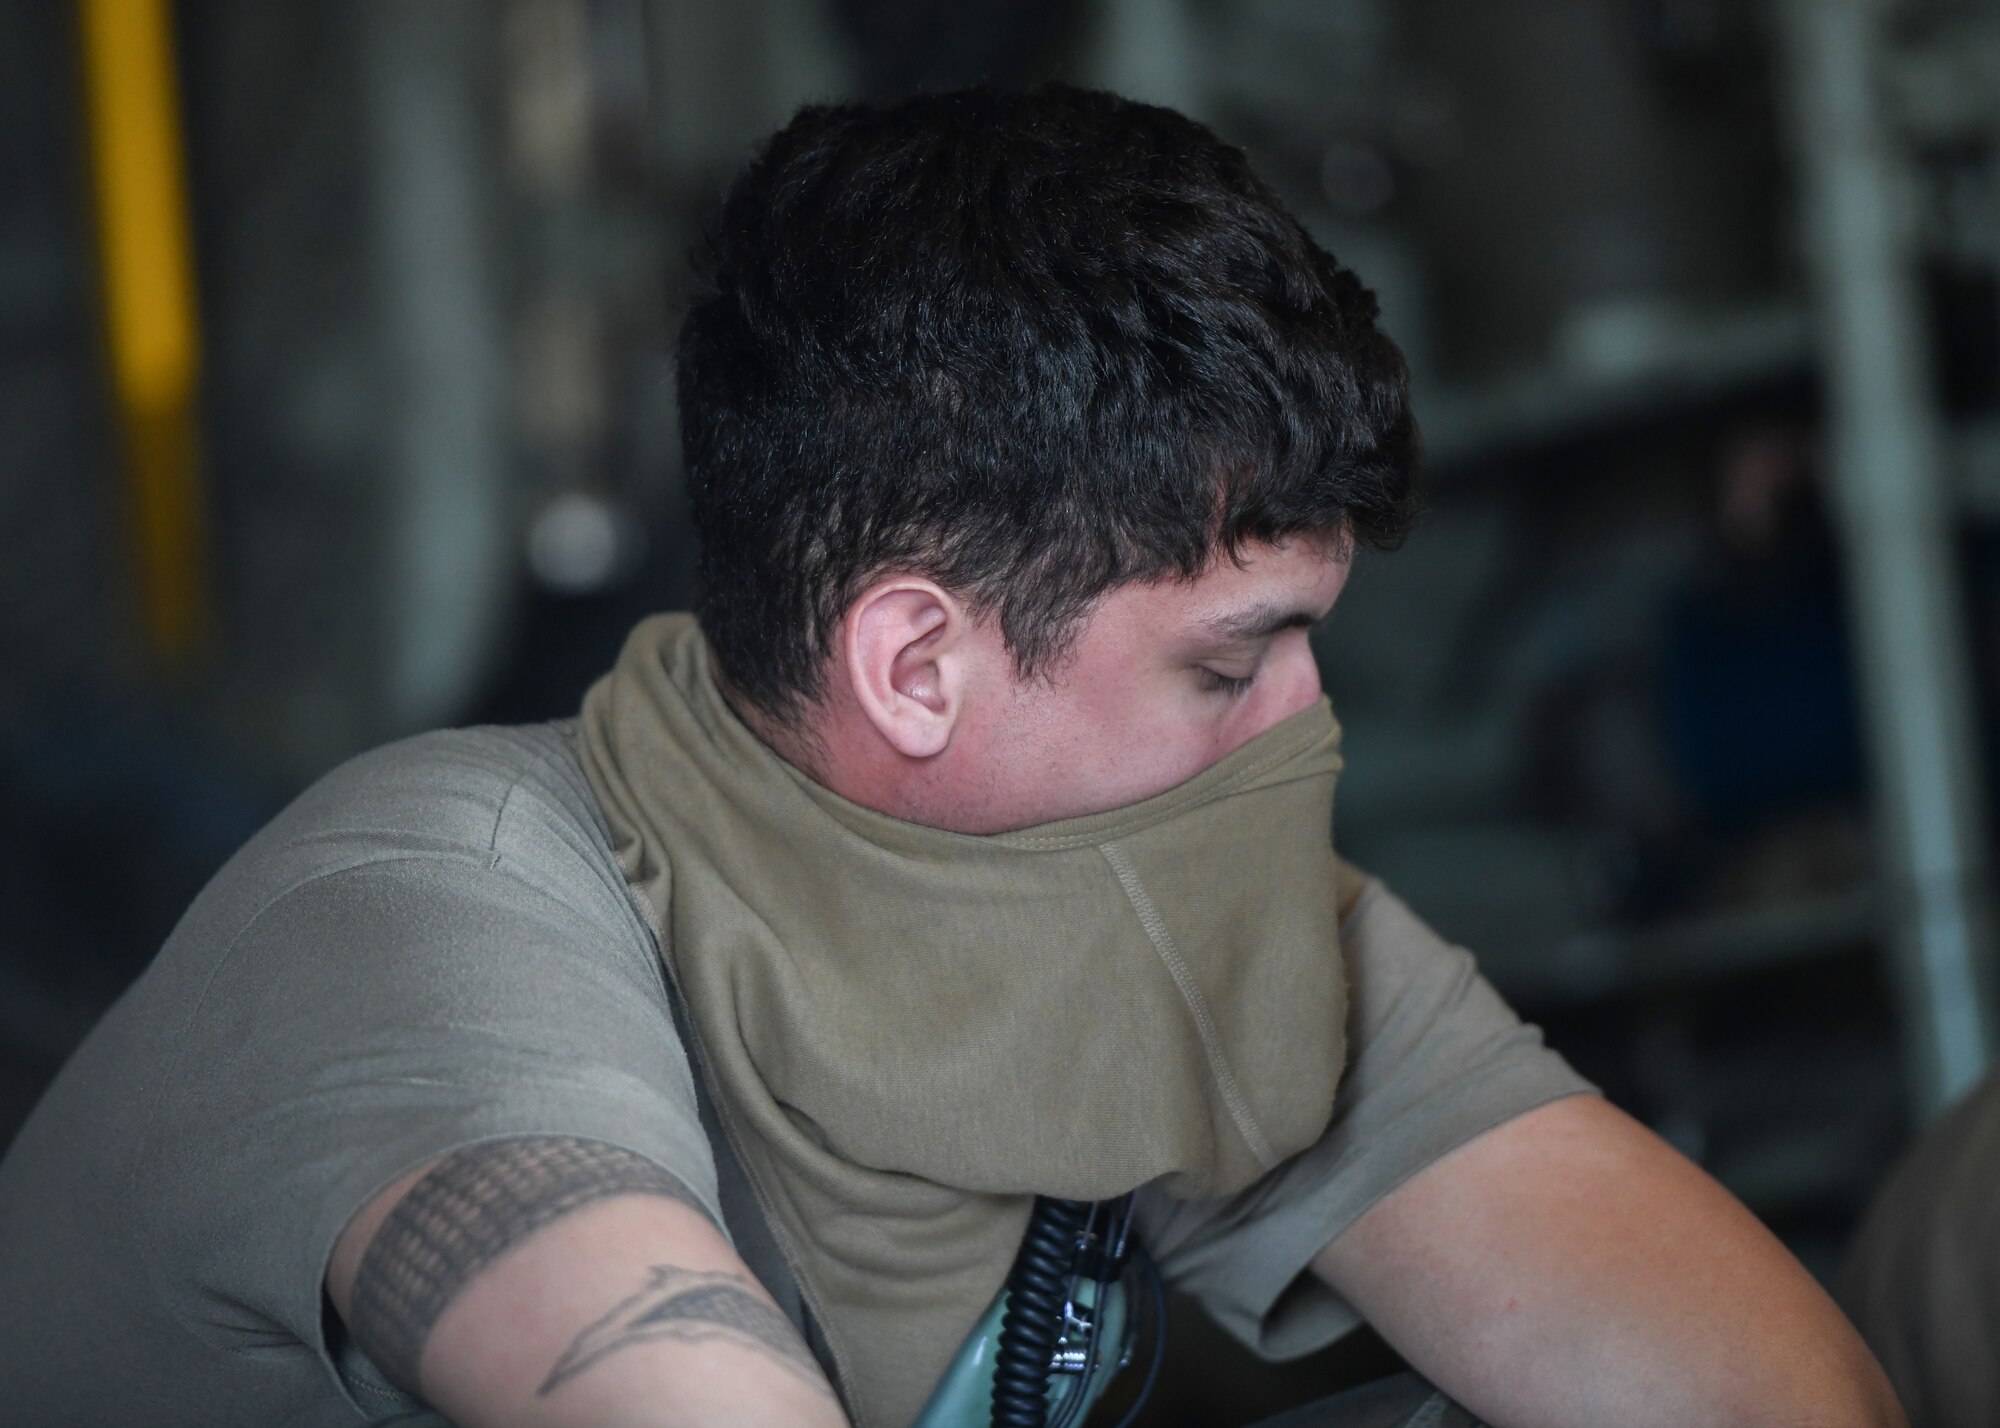 An Airman sits with a mask covering his mouth and nose.